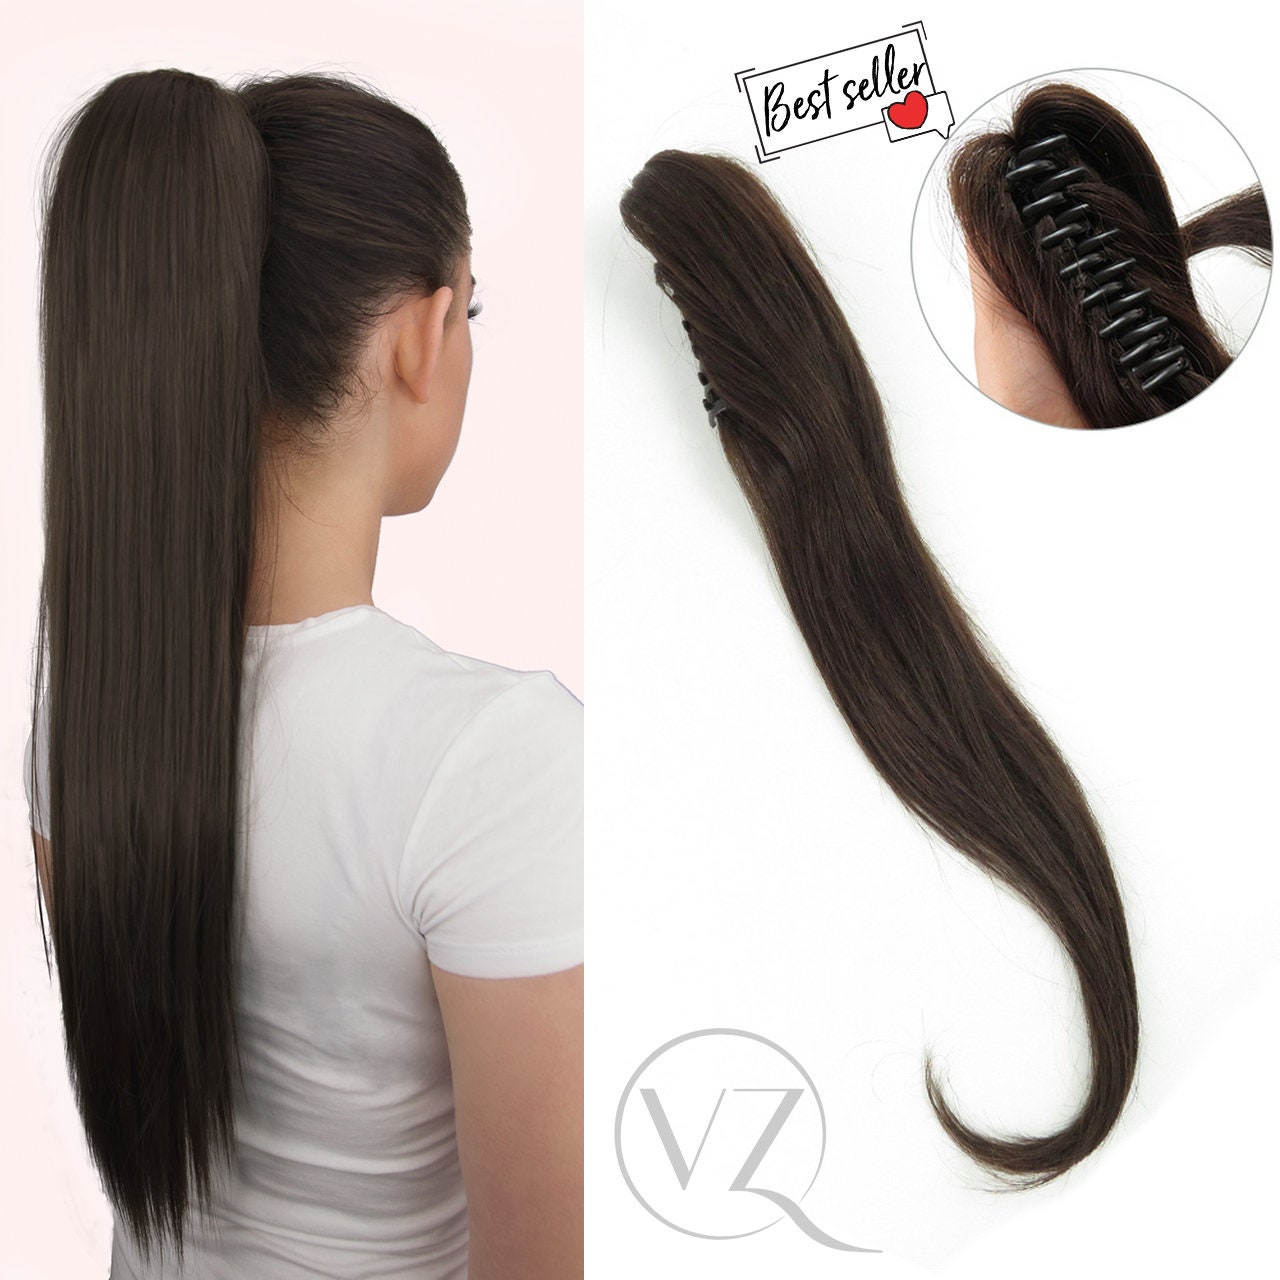 Buy Ponytail Hair Extensions at Best Prices Online in India  shopSalonLabsin